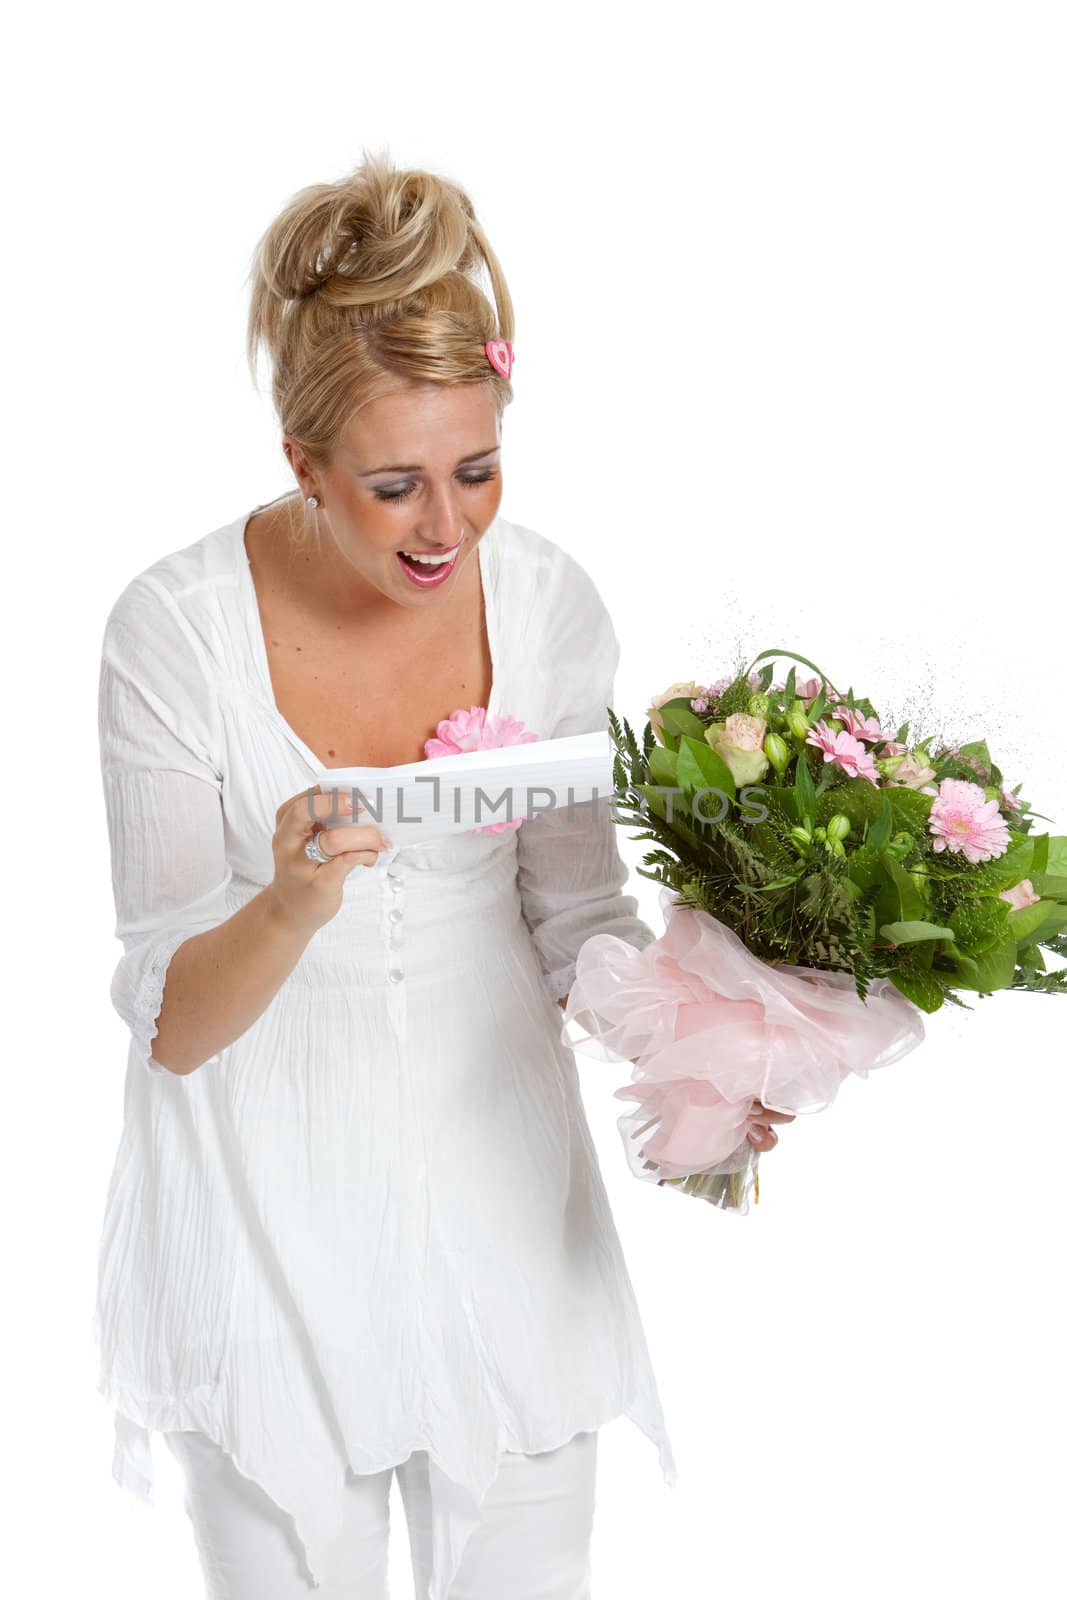 Beautiful girl looking happy and surprised at the note that came with the flowers